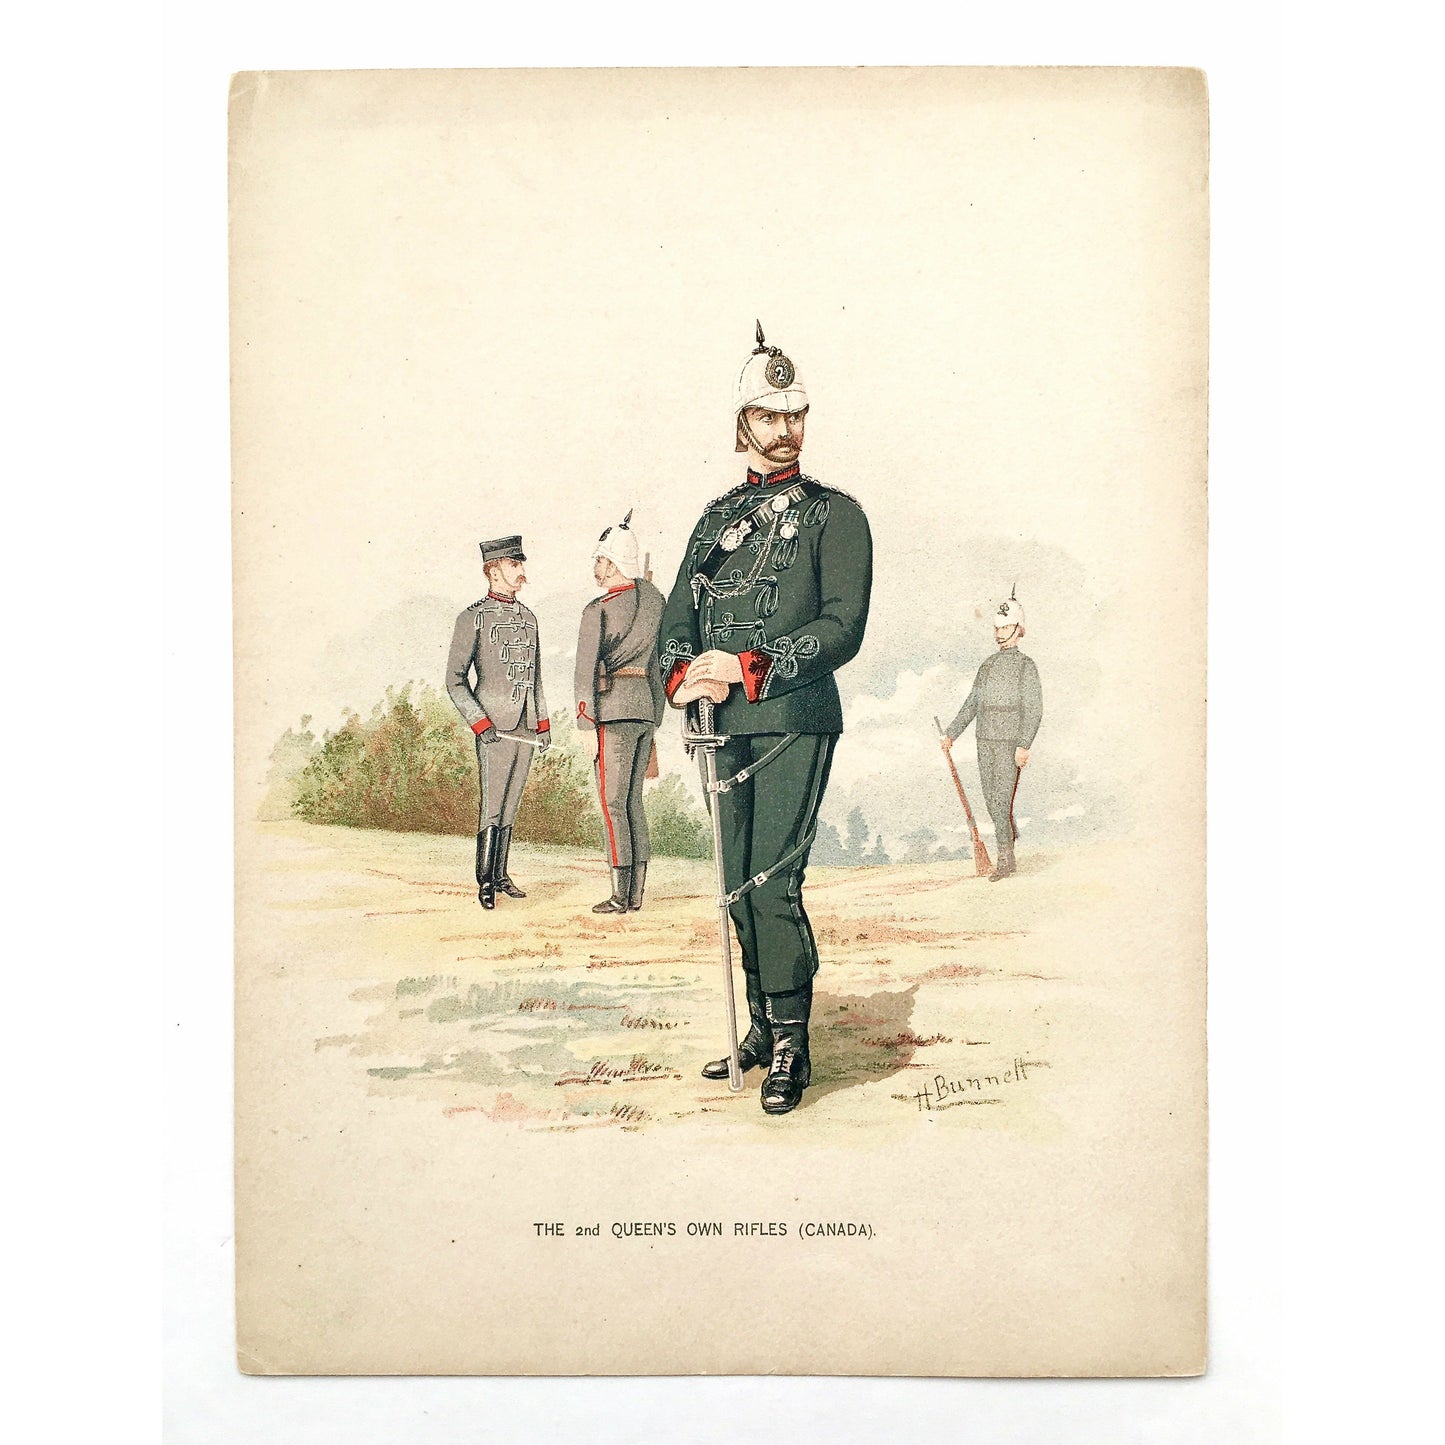 The 2nd Queen's Own Rifles, Rifles, Canada, Artillery, Military, Military Costume, Horses, Riding, Costume, Uniform, Her Majesty's Army, Regiments, Queen's Forces, H. Bunnett, Bunnett, Sword, Army, London, 1890, Military Prints, Canadian, Canadian Military, Canadian Army, Armed Forces, Military Uniform, Chromolithograph, J. S. Virtue & Co., Antique Prints, Antique, Prints, Vintage, Home decor, Interior decor, wall art, wall decor, Interior design, Art History, Military History, Design, Art, Printmaking, art